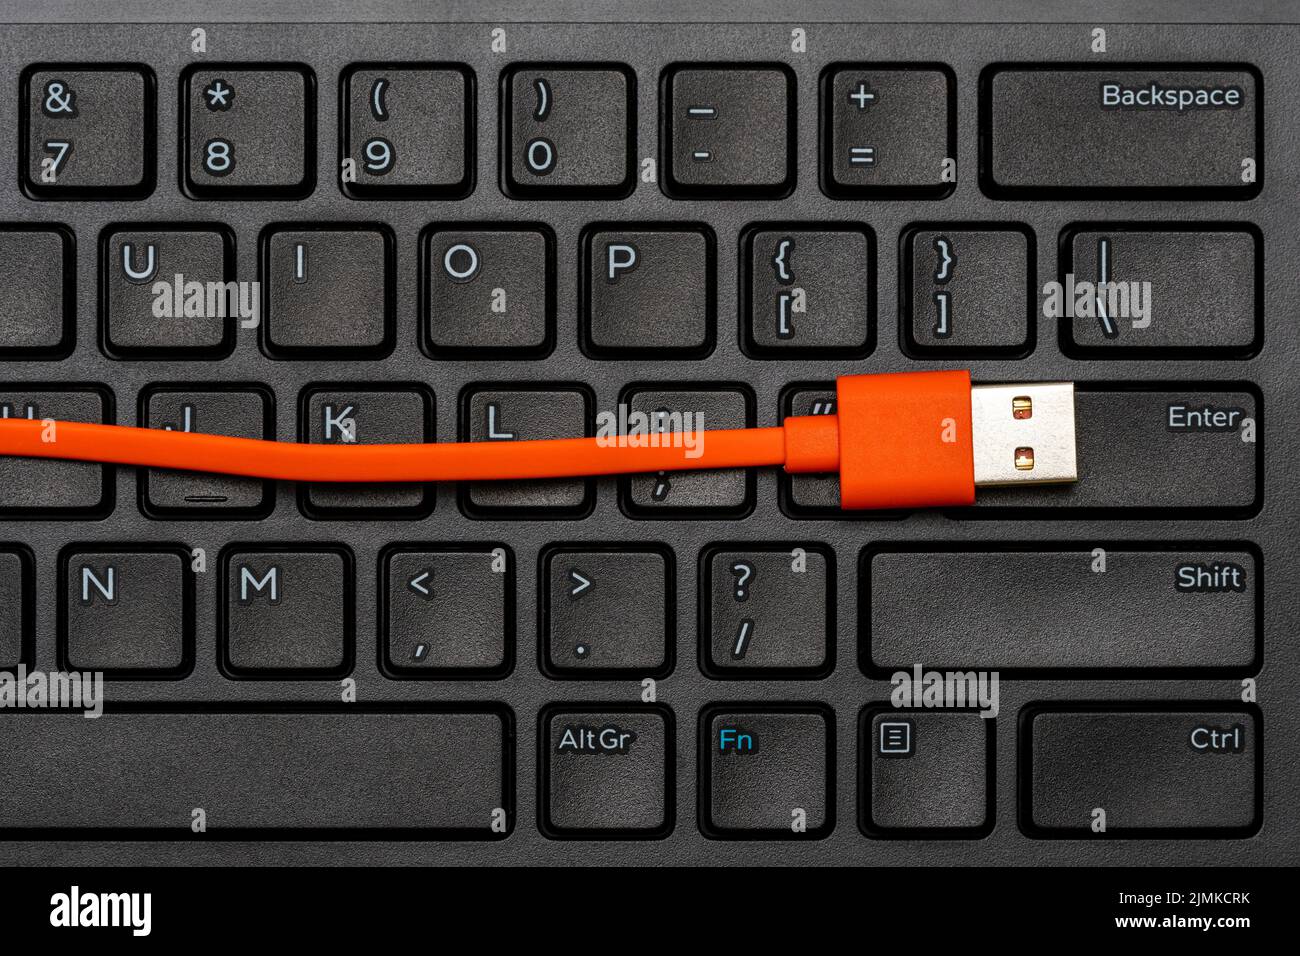 Computer keyboard and orange USB cable Stock Photo